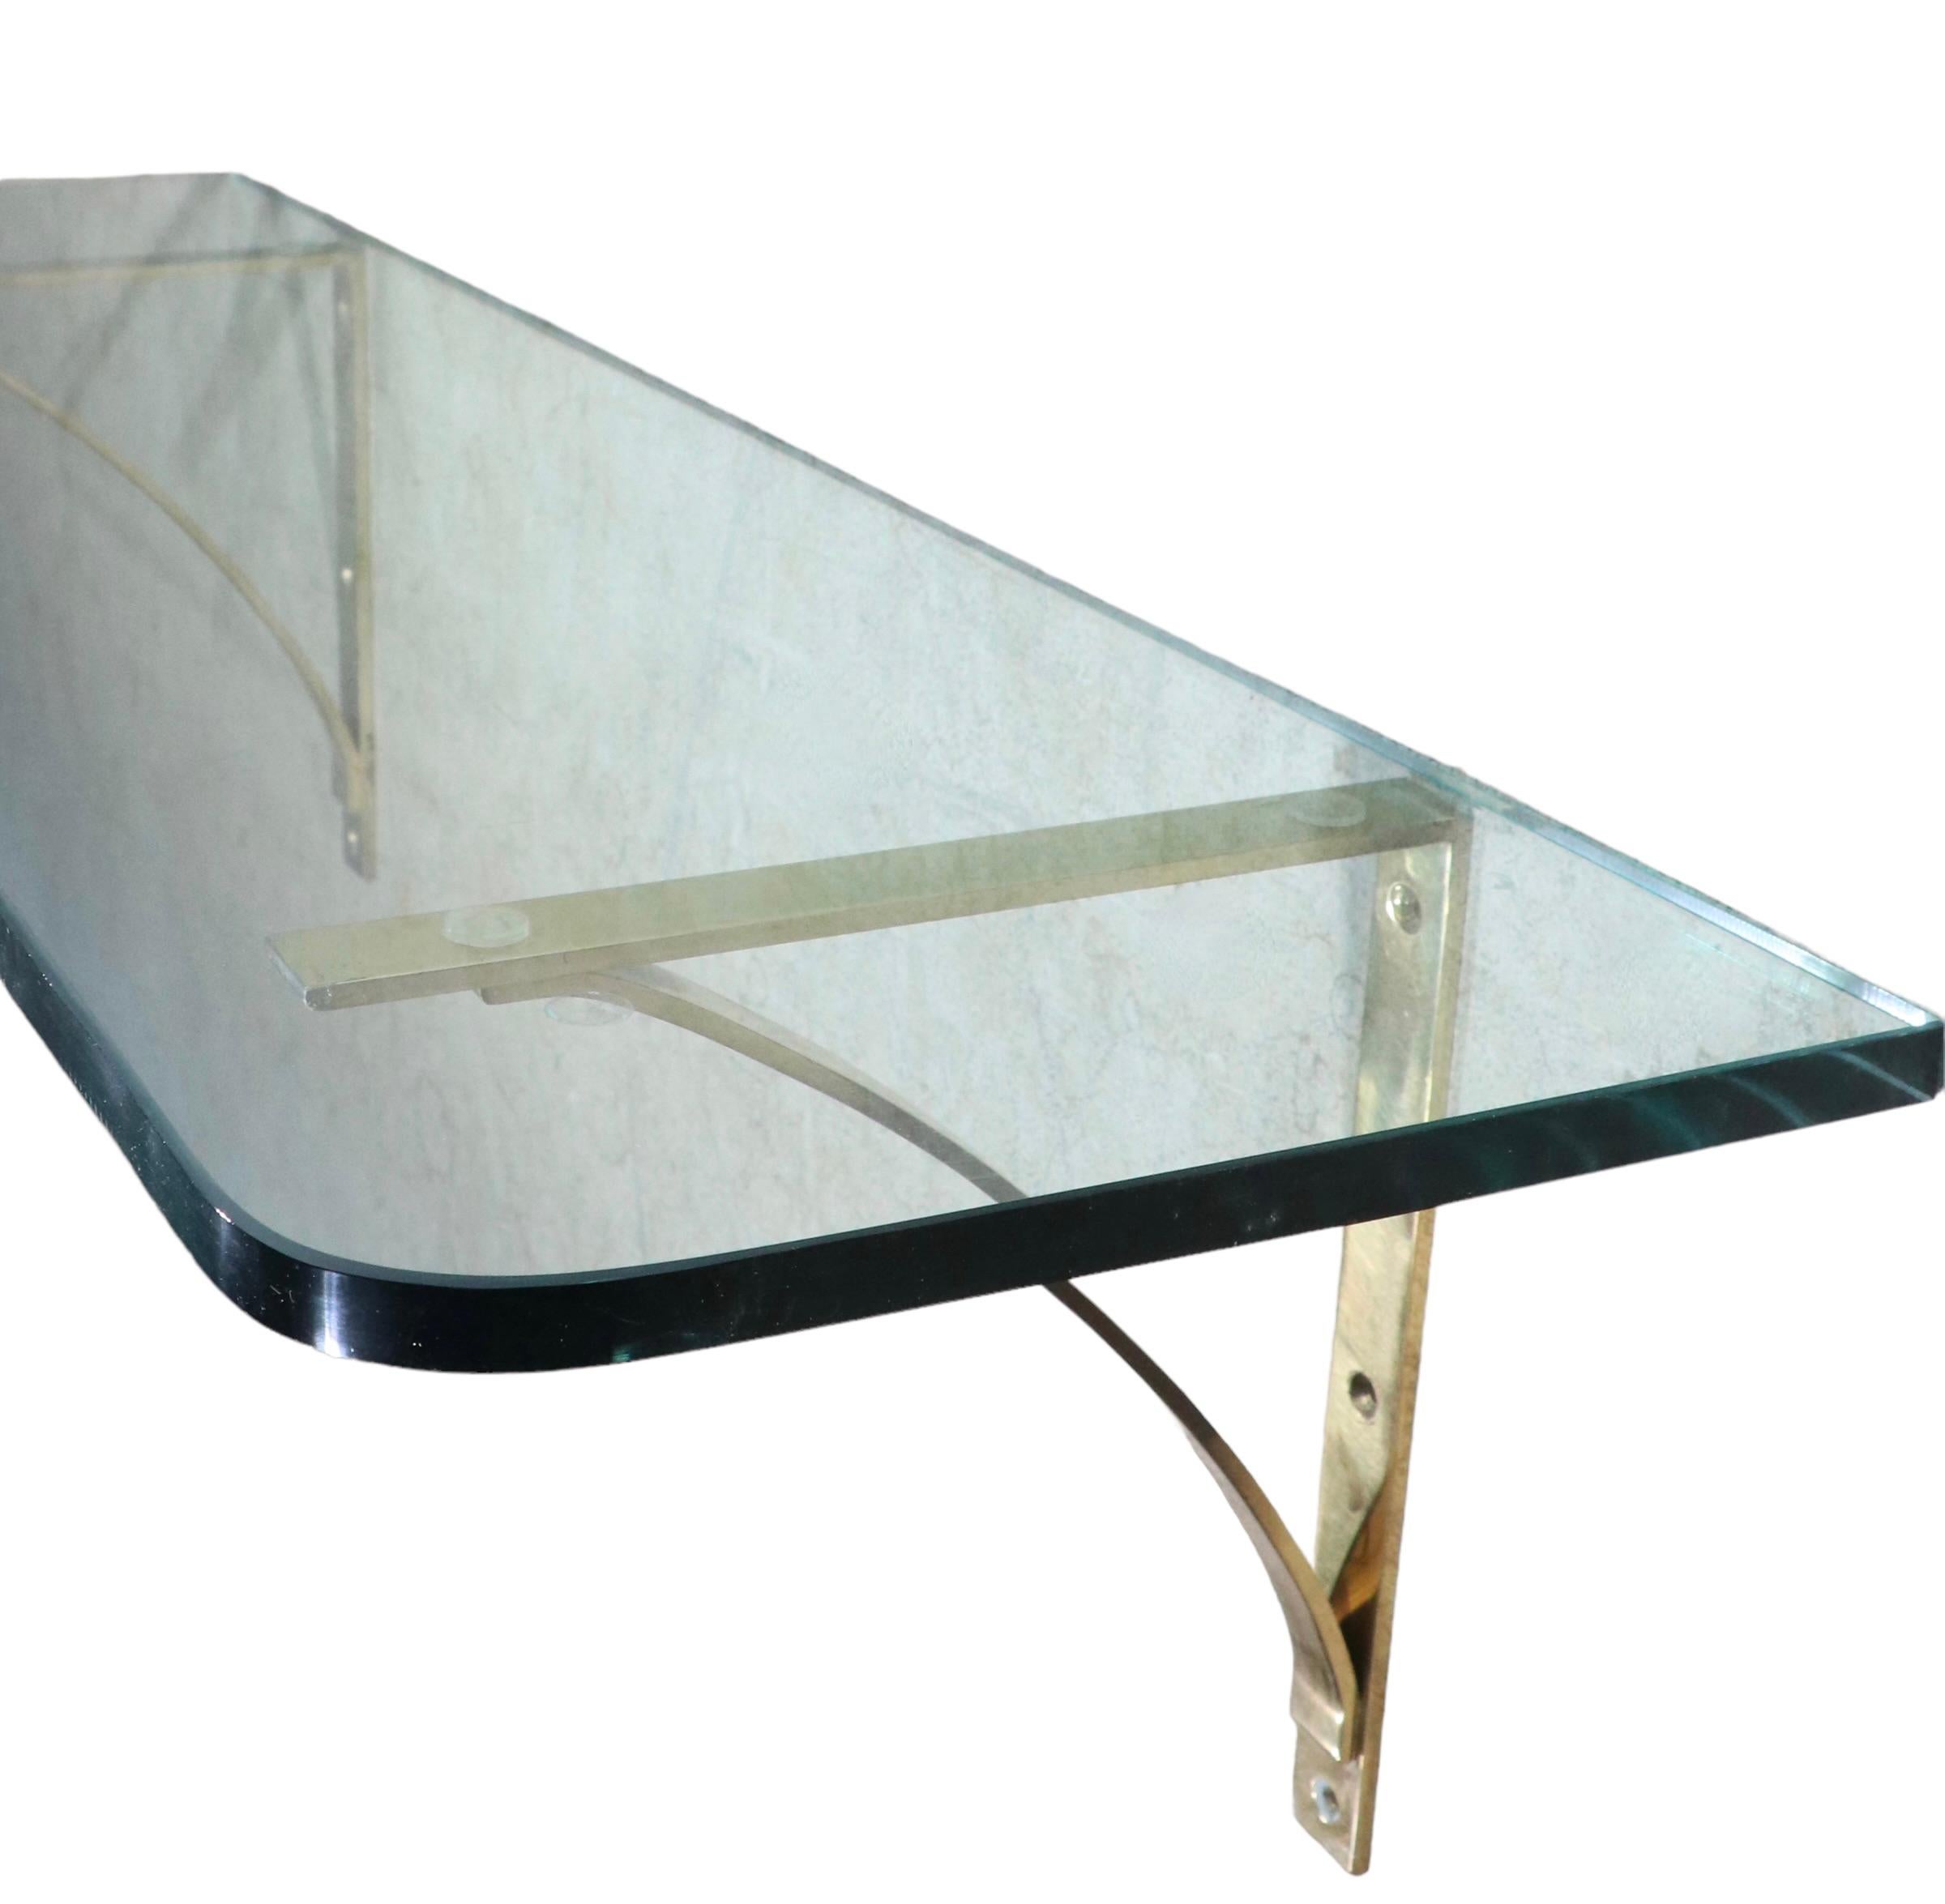 Post Modern Plate Glass and Brass Wall Mount Shelf, C. 1970's For Sale 8